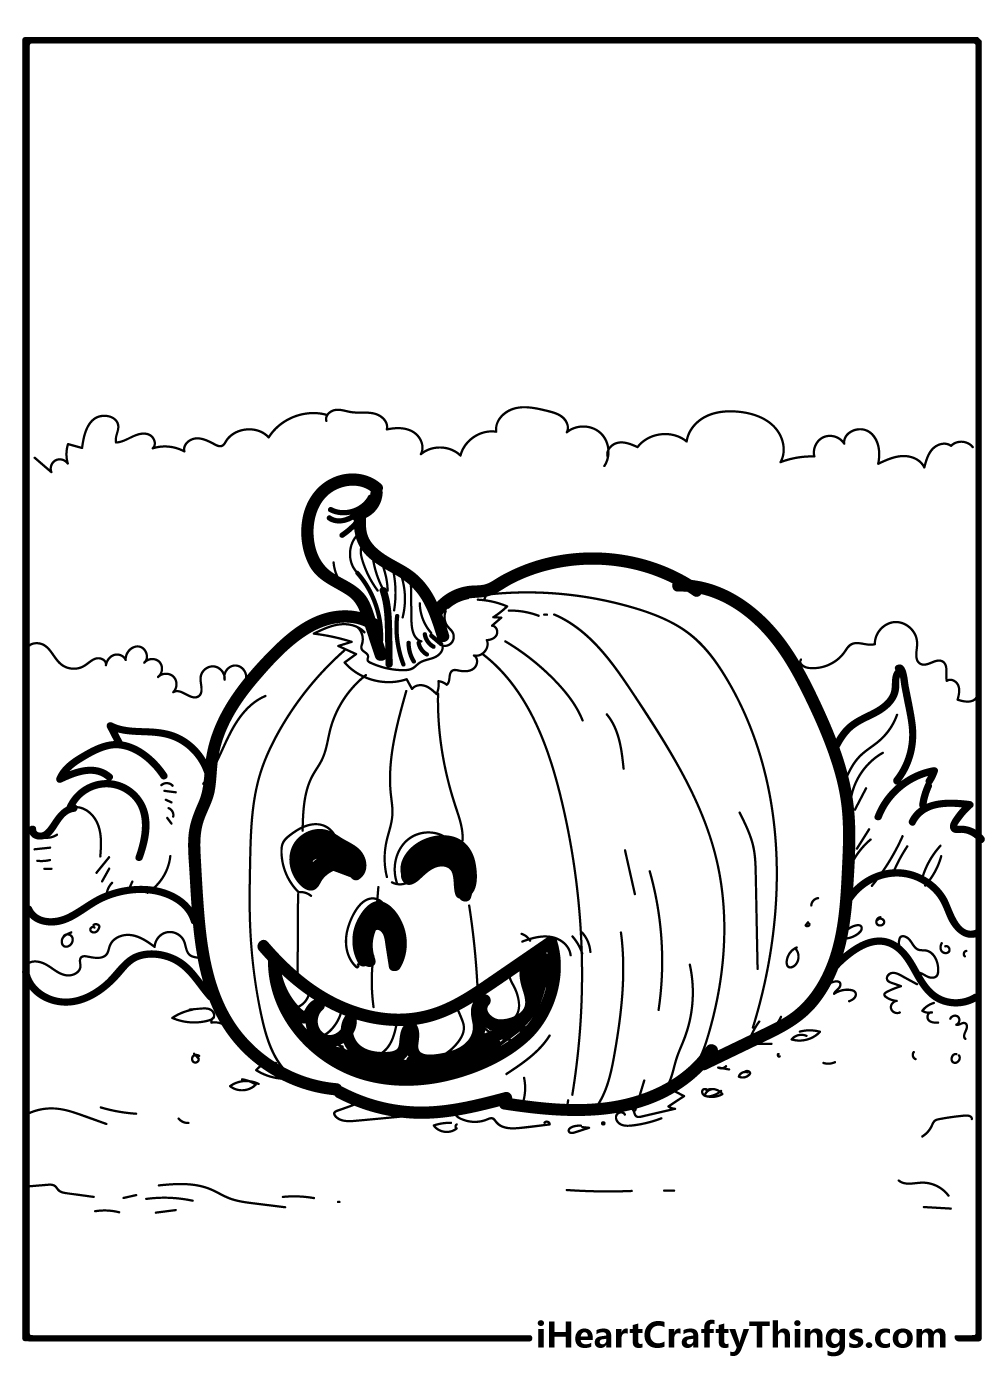 Pumpkin Coloring Pages for adults free print out